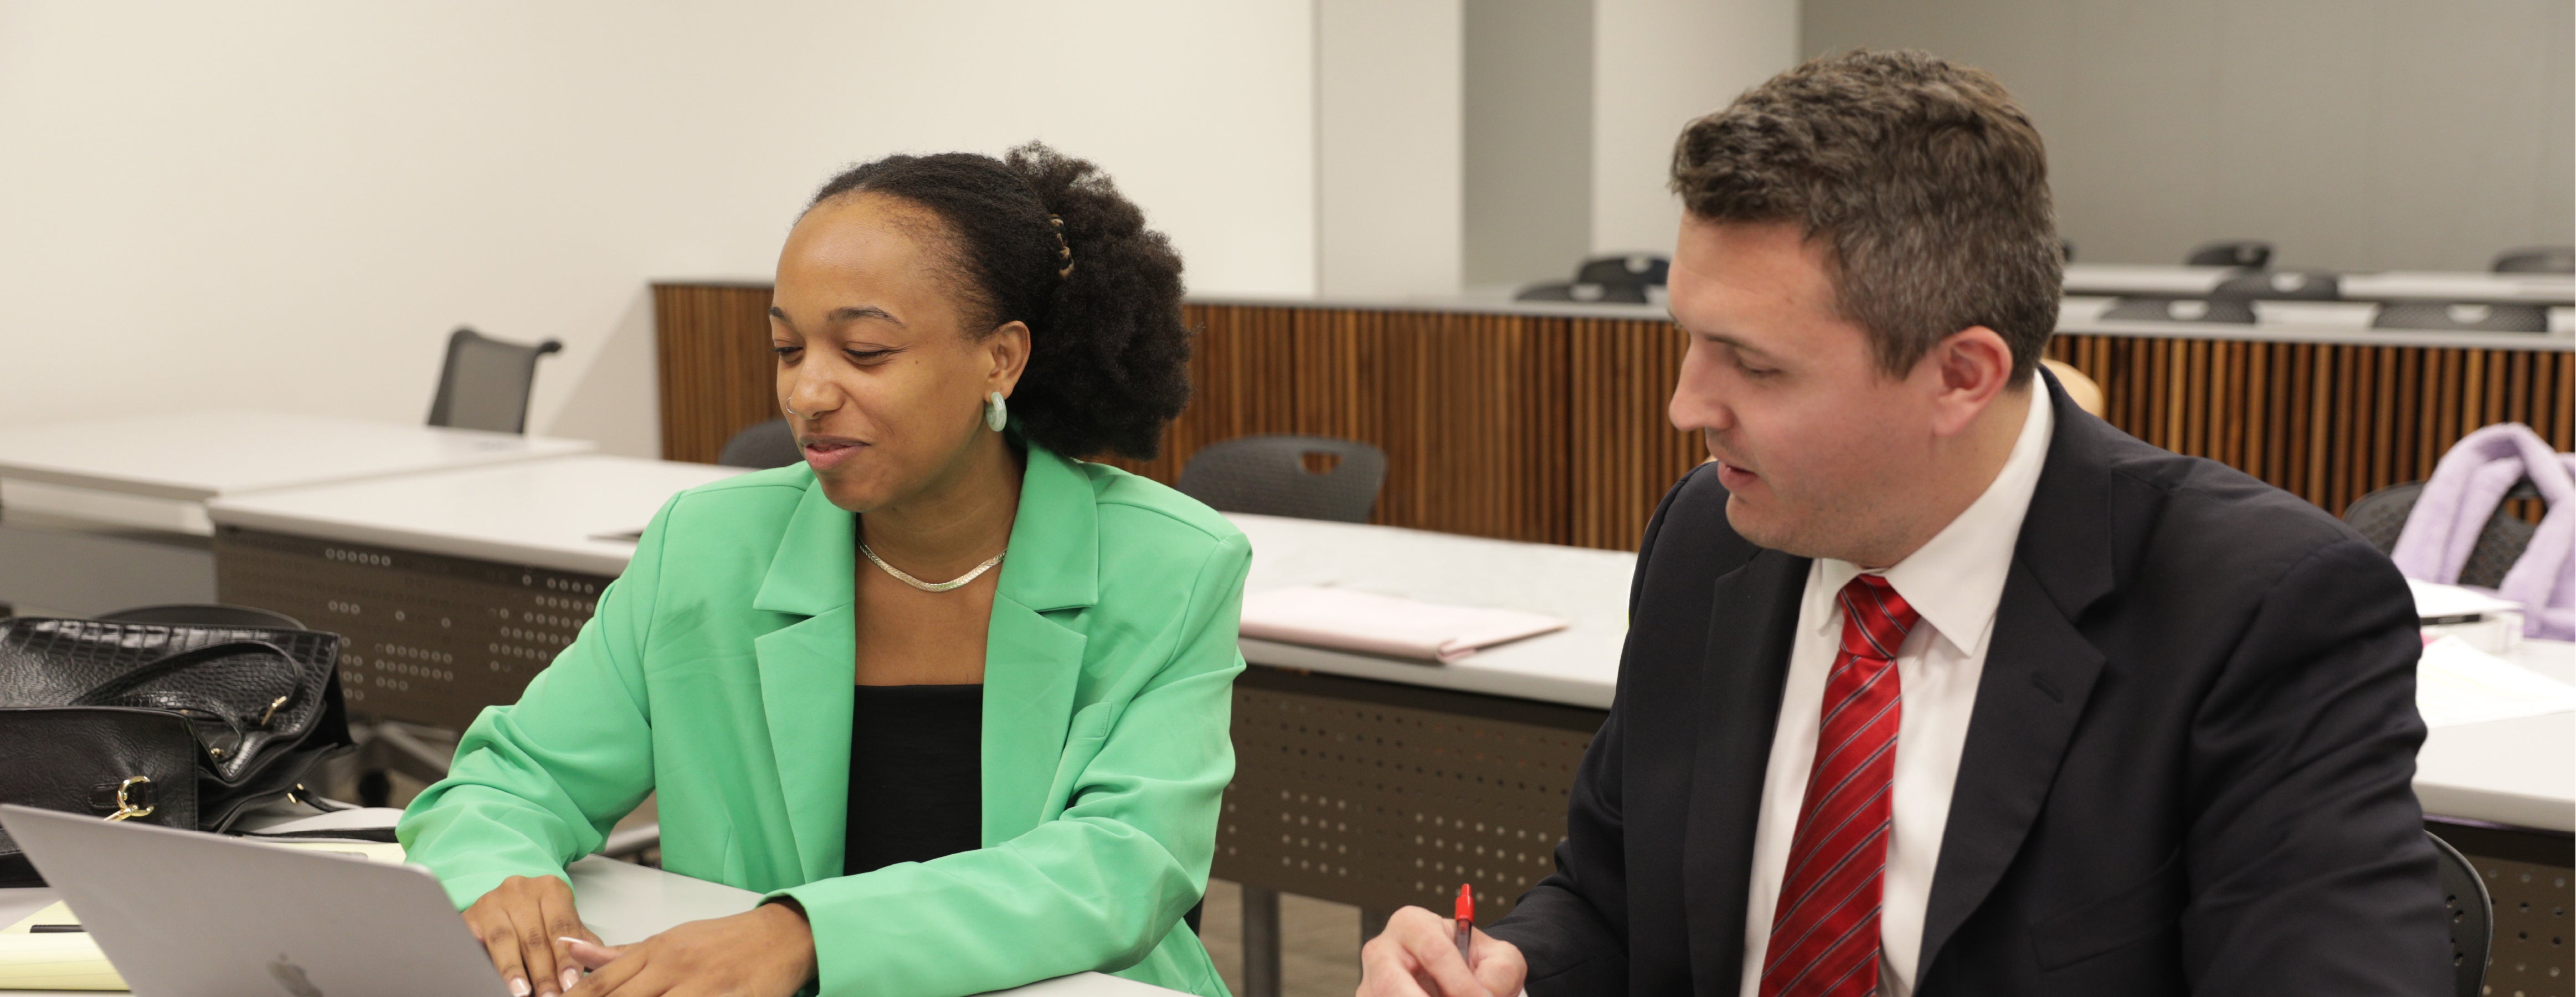 Two students discussing their strategies in Moot Court during a mock trial.